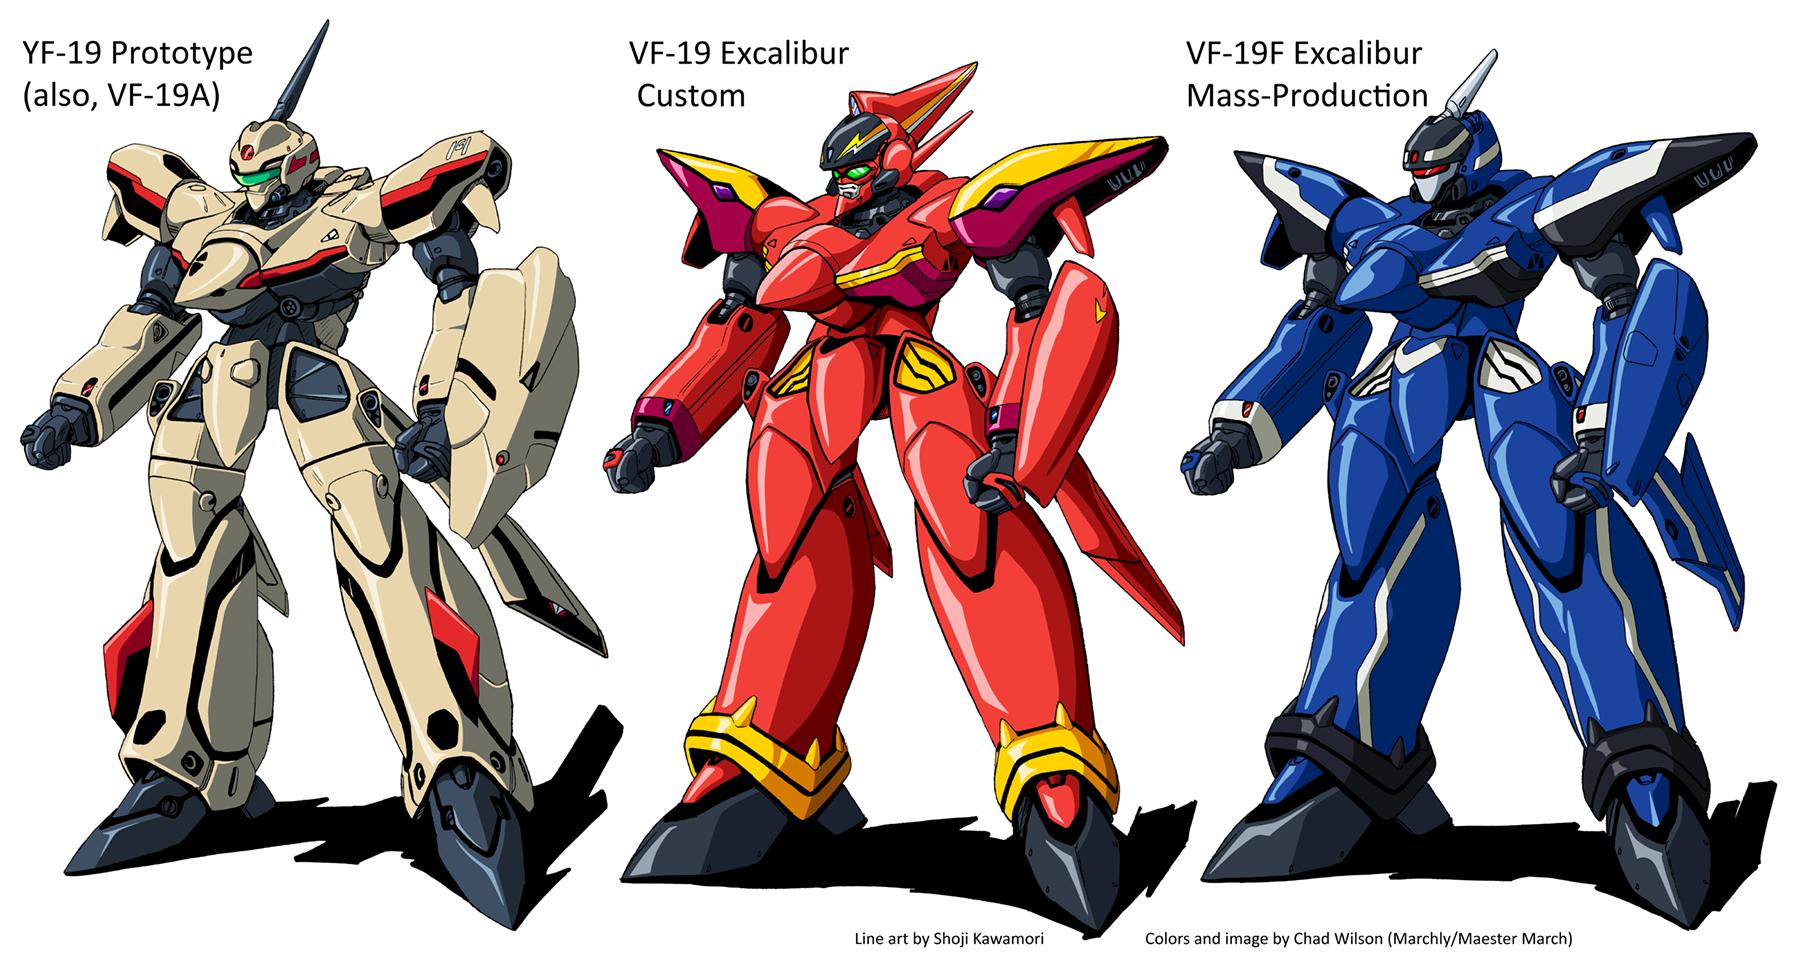 Chad Comparison Of The Battroid Mode A Portmanteau Of Battle And Android Of The Yf 19 Vf 19 Excalibur One Of The Most Popular Mecha In The Macross Anime Ip Variant Types Of